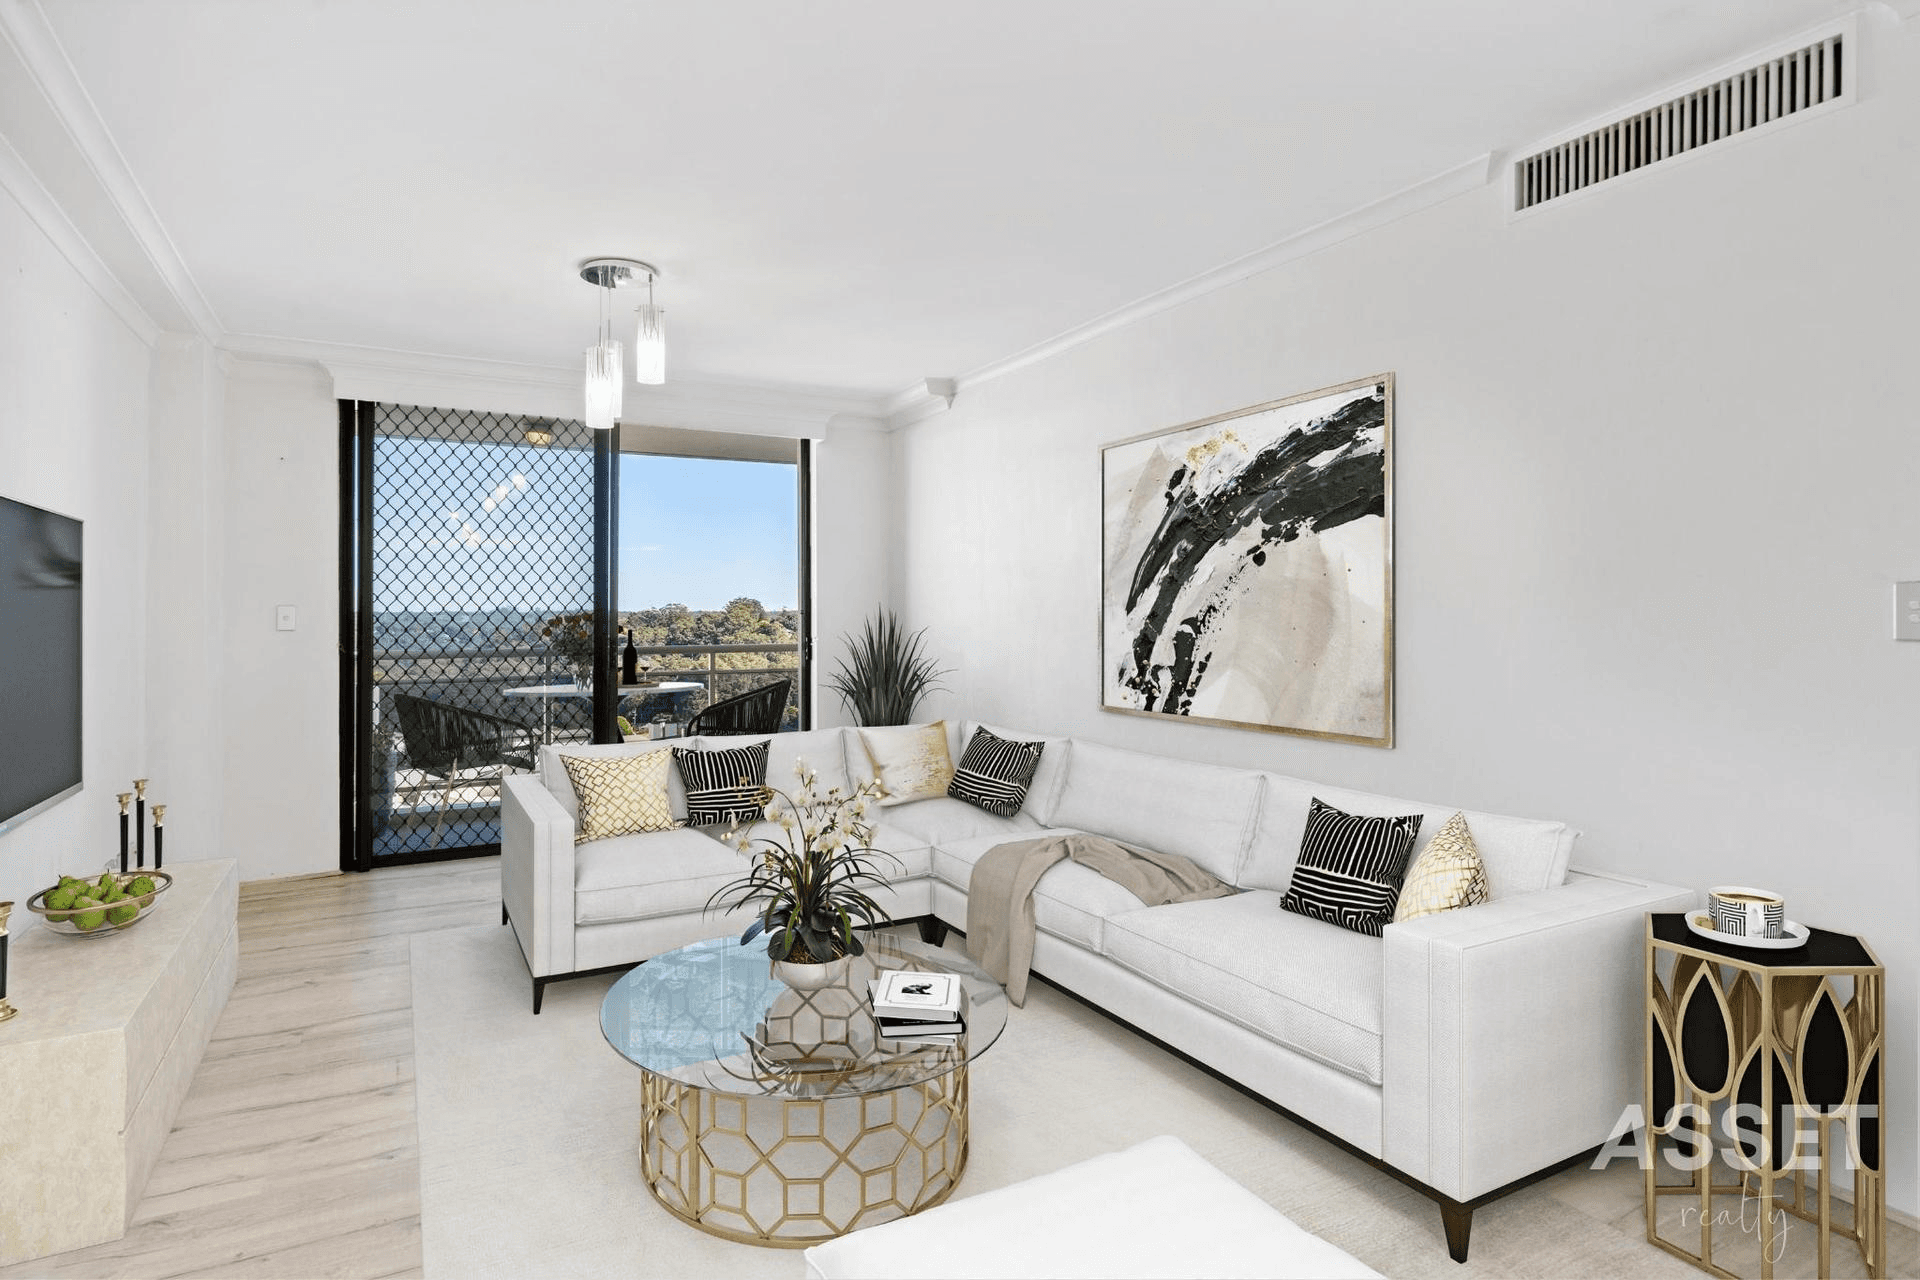 99/121-133 Pacific Highway, Hornsby, NSW 2077